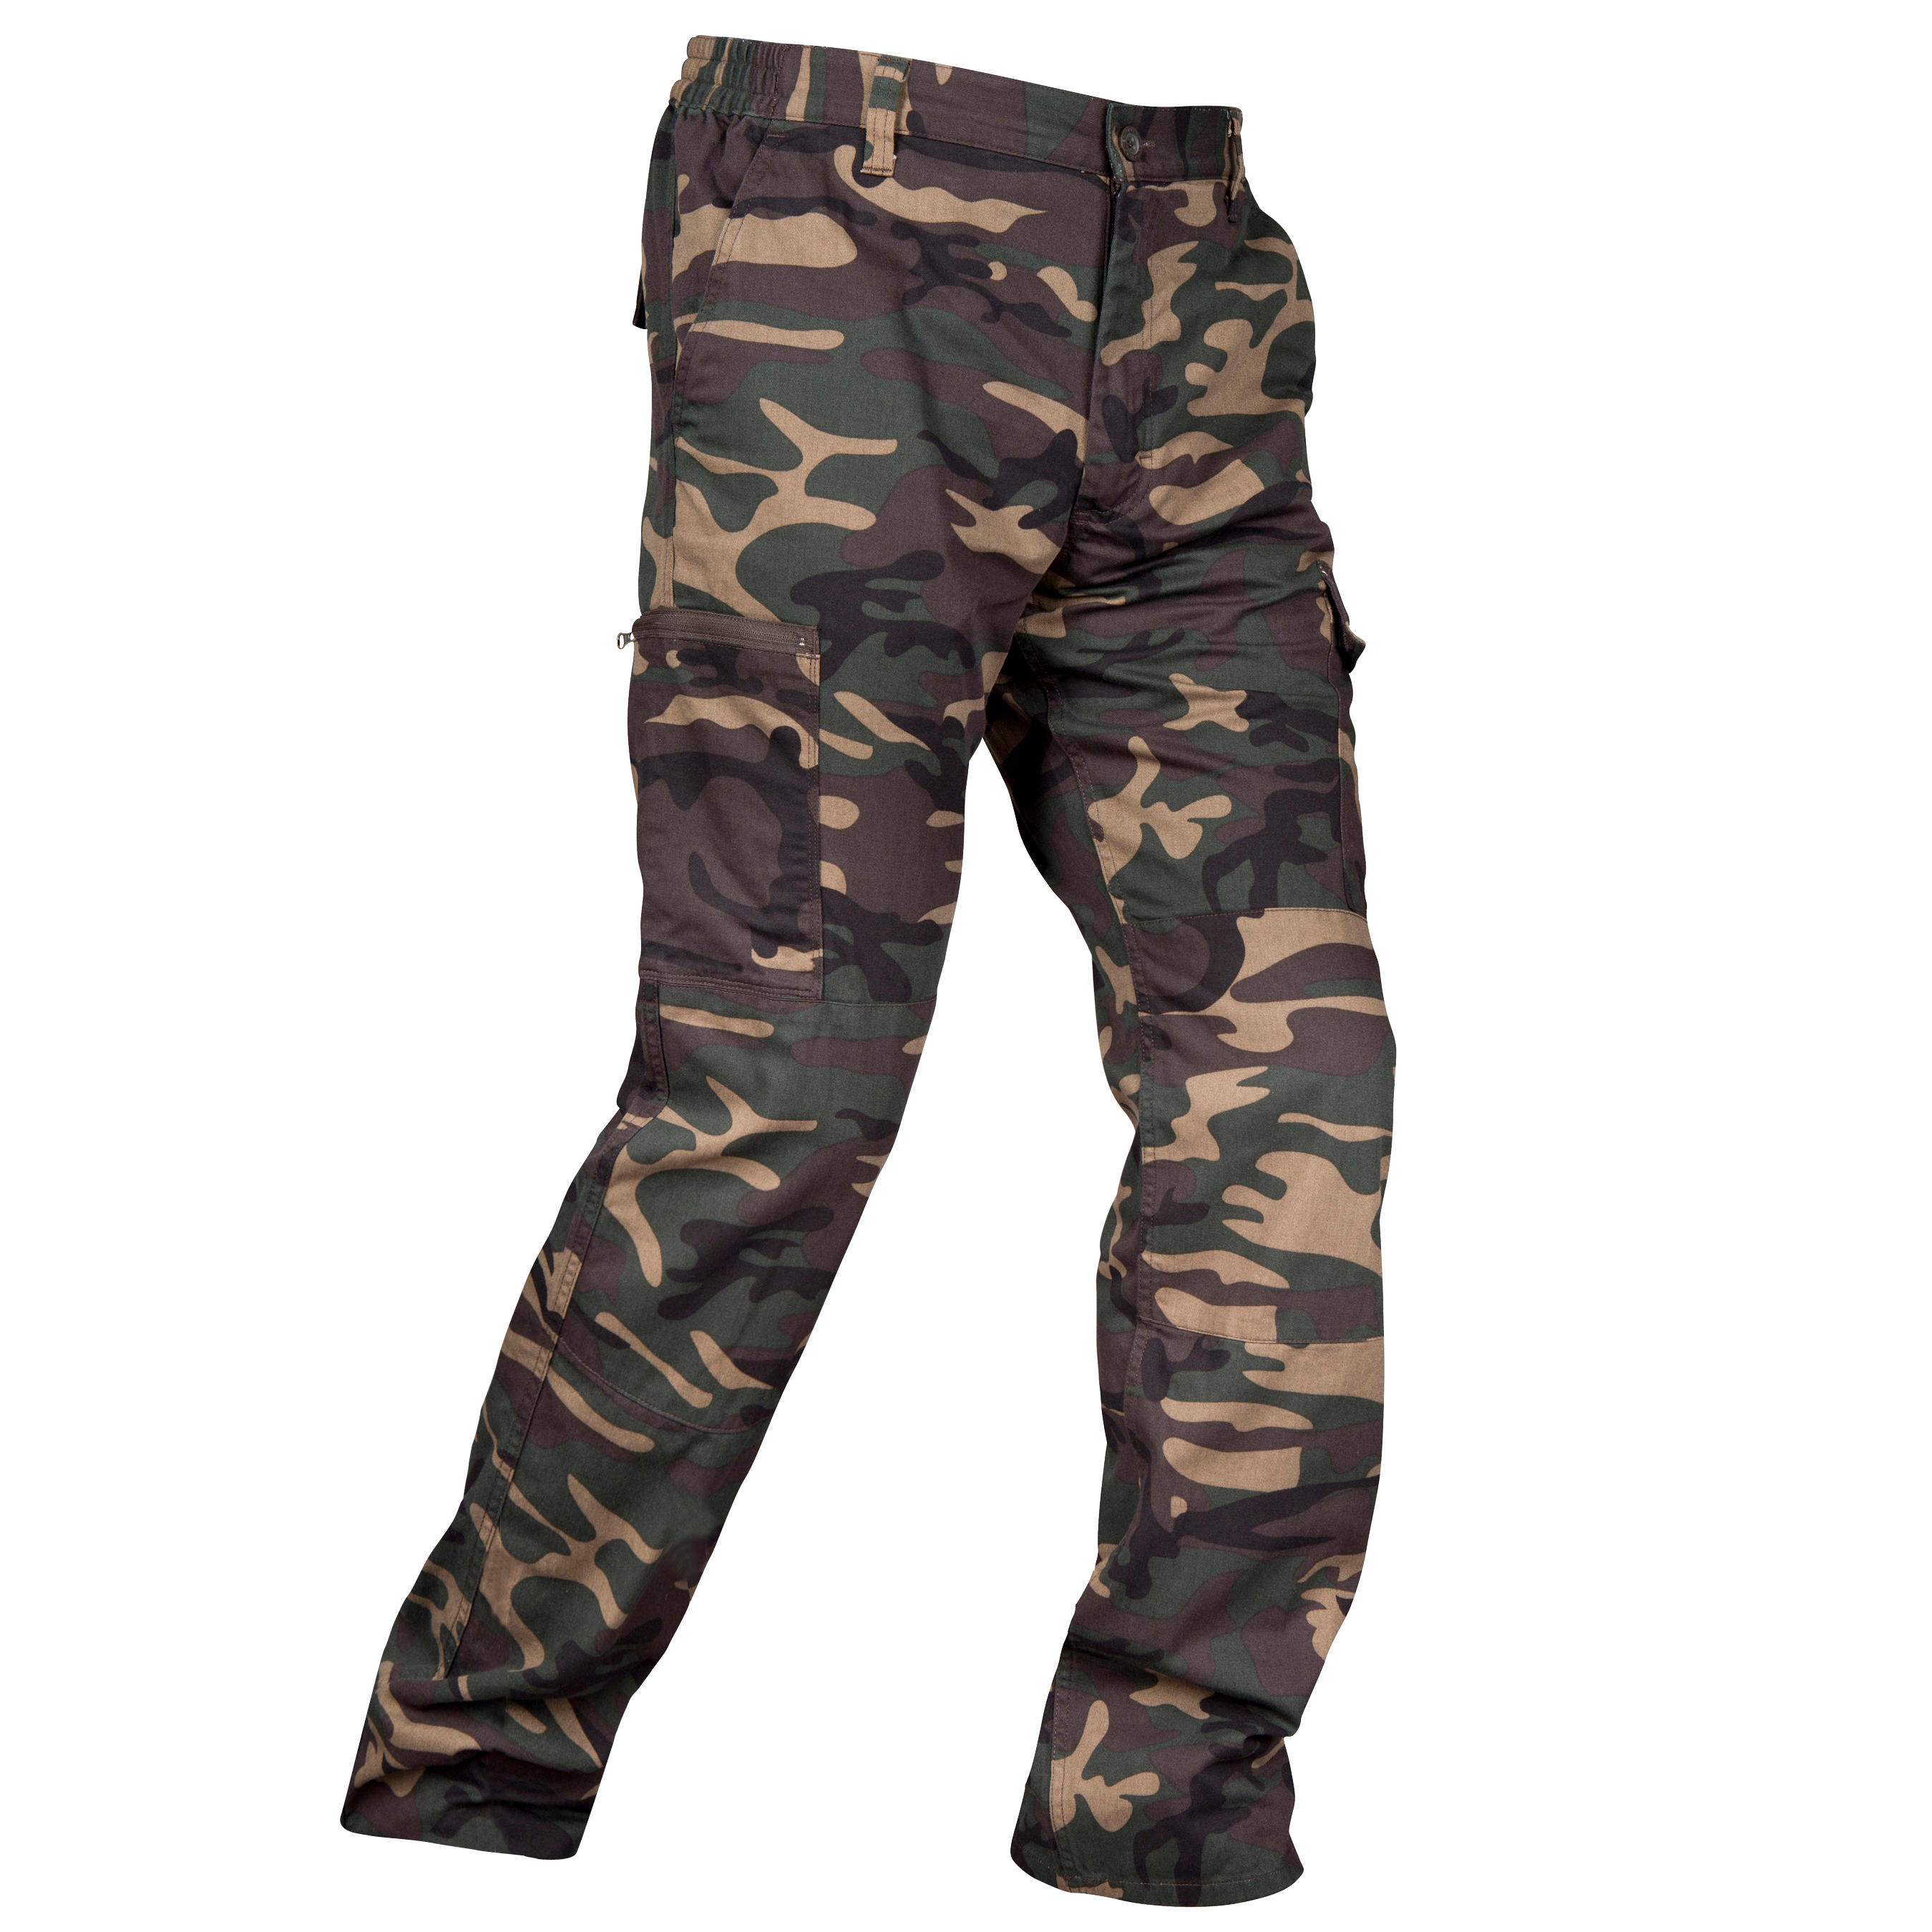 Buy Woodland Green BDU Camouflage Jungle Pants Size MR Stock Online in India   Etsy